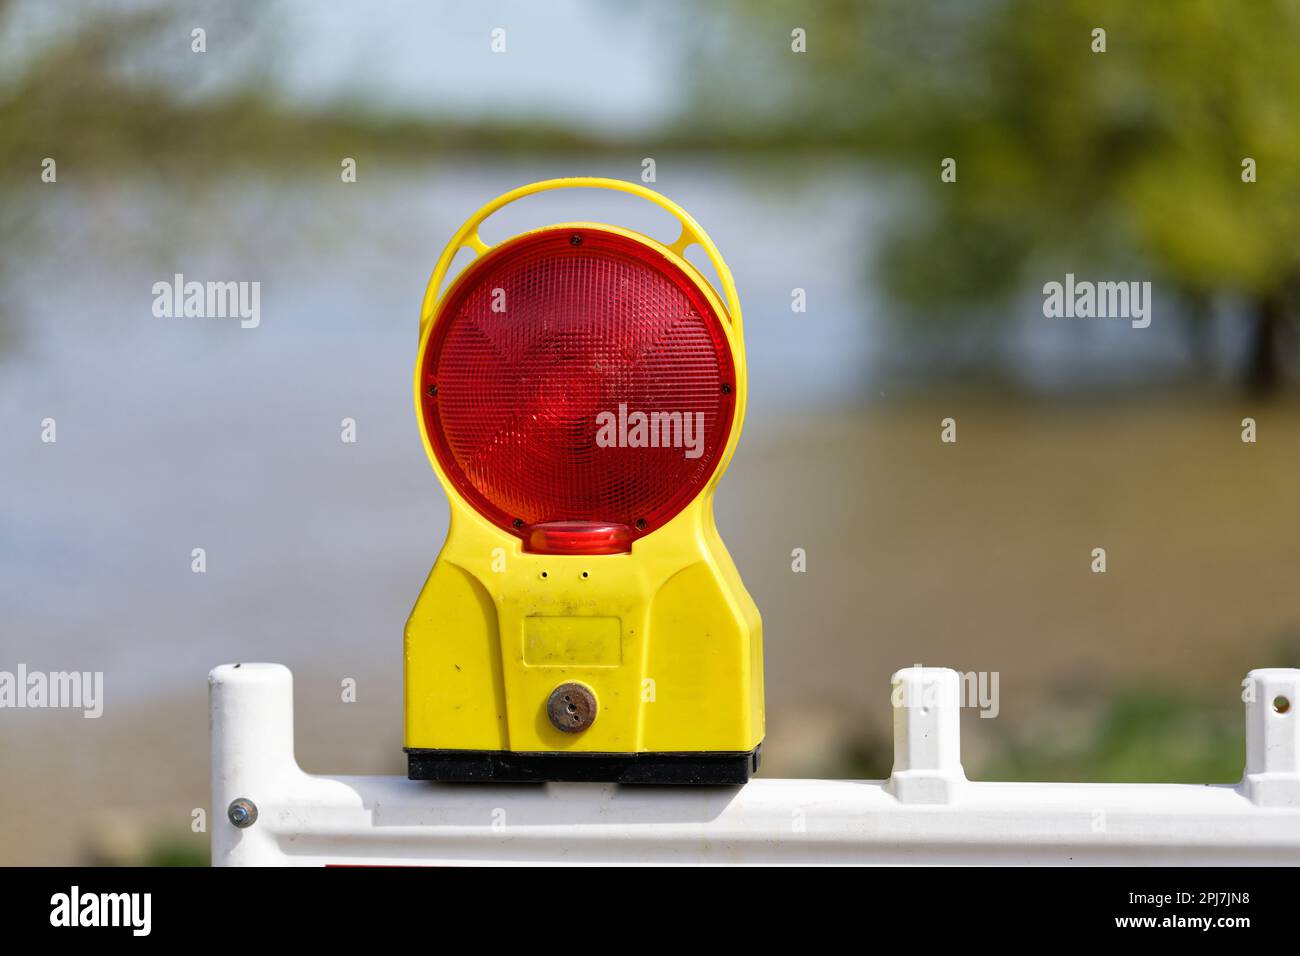 warning light on a barrier grid in front of high water on a river in blurred background Stock Photo